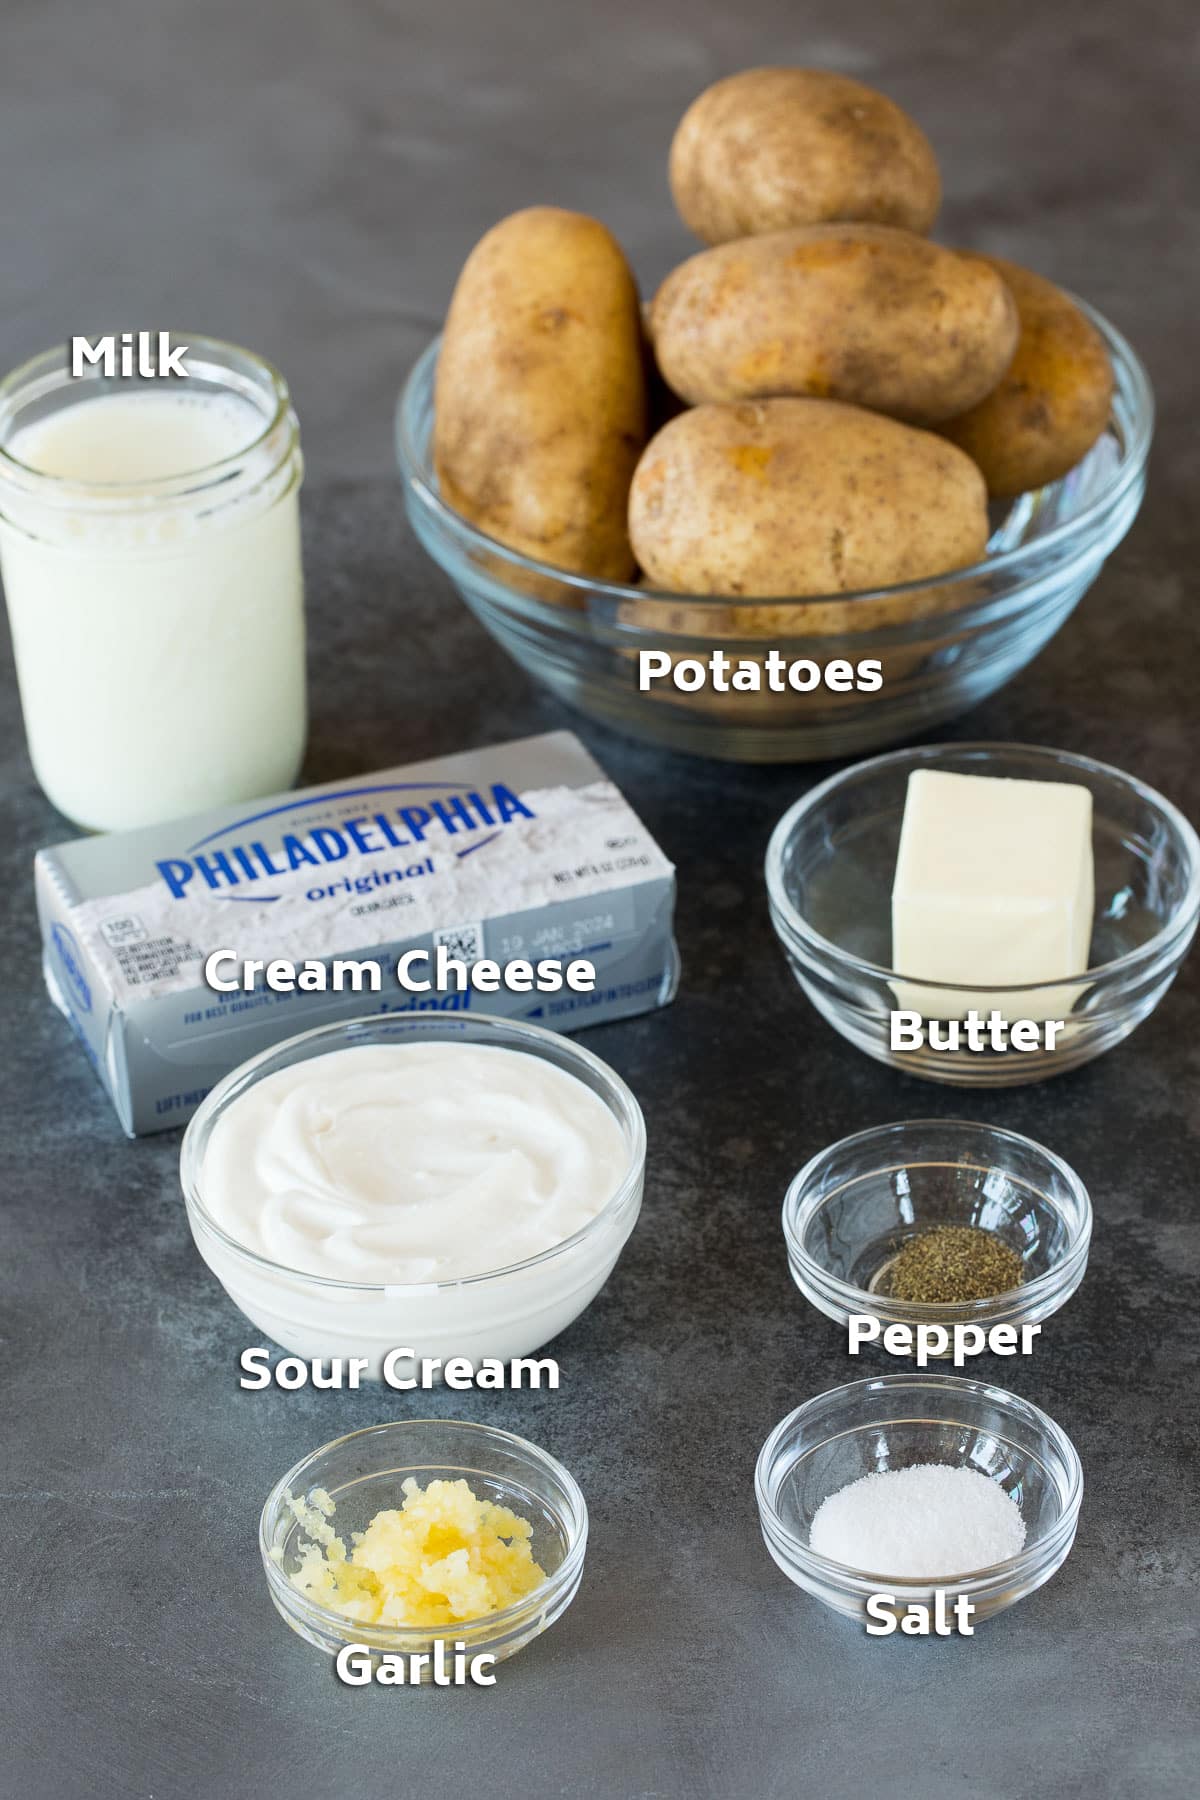 Ingredients including potatoes, cream cheese, sour cream, butter and seasonings.